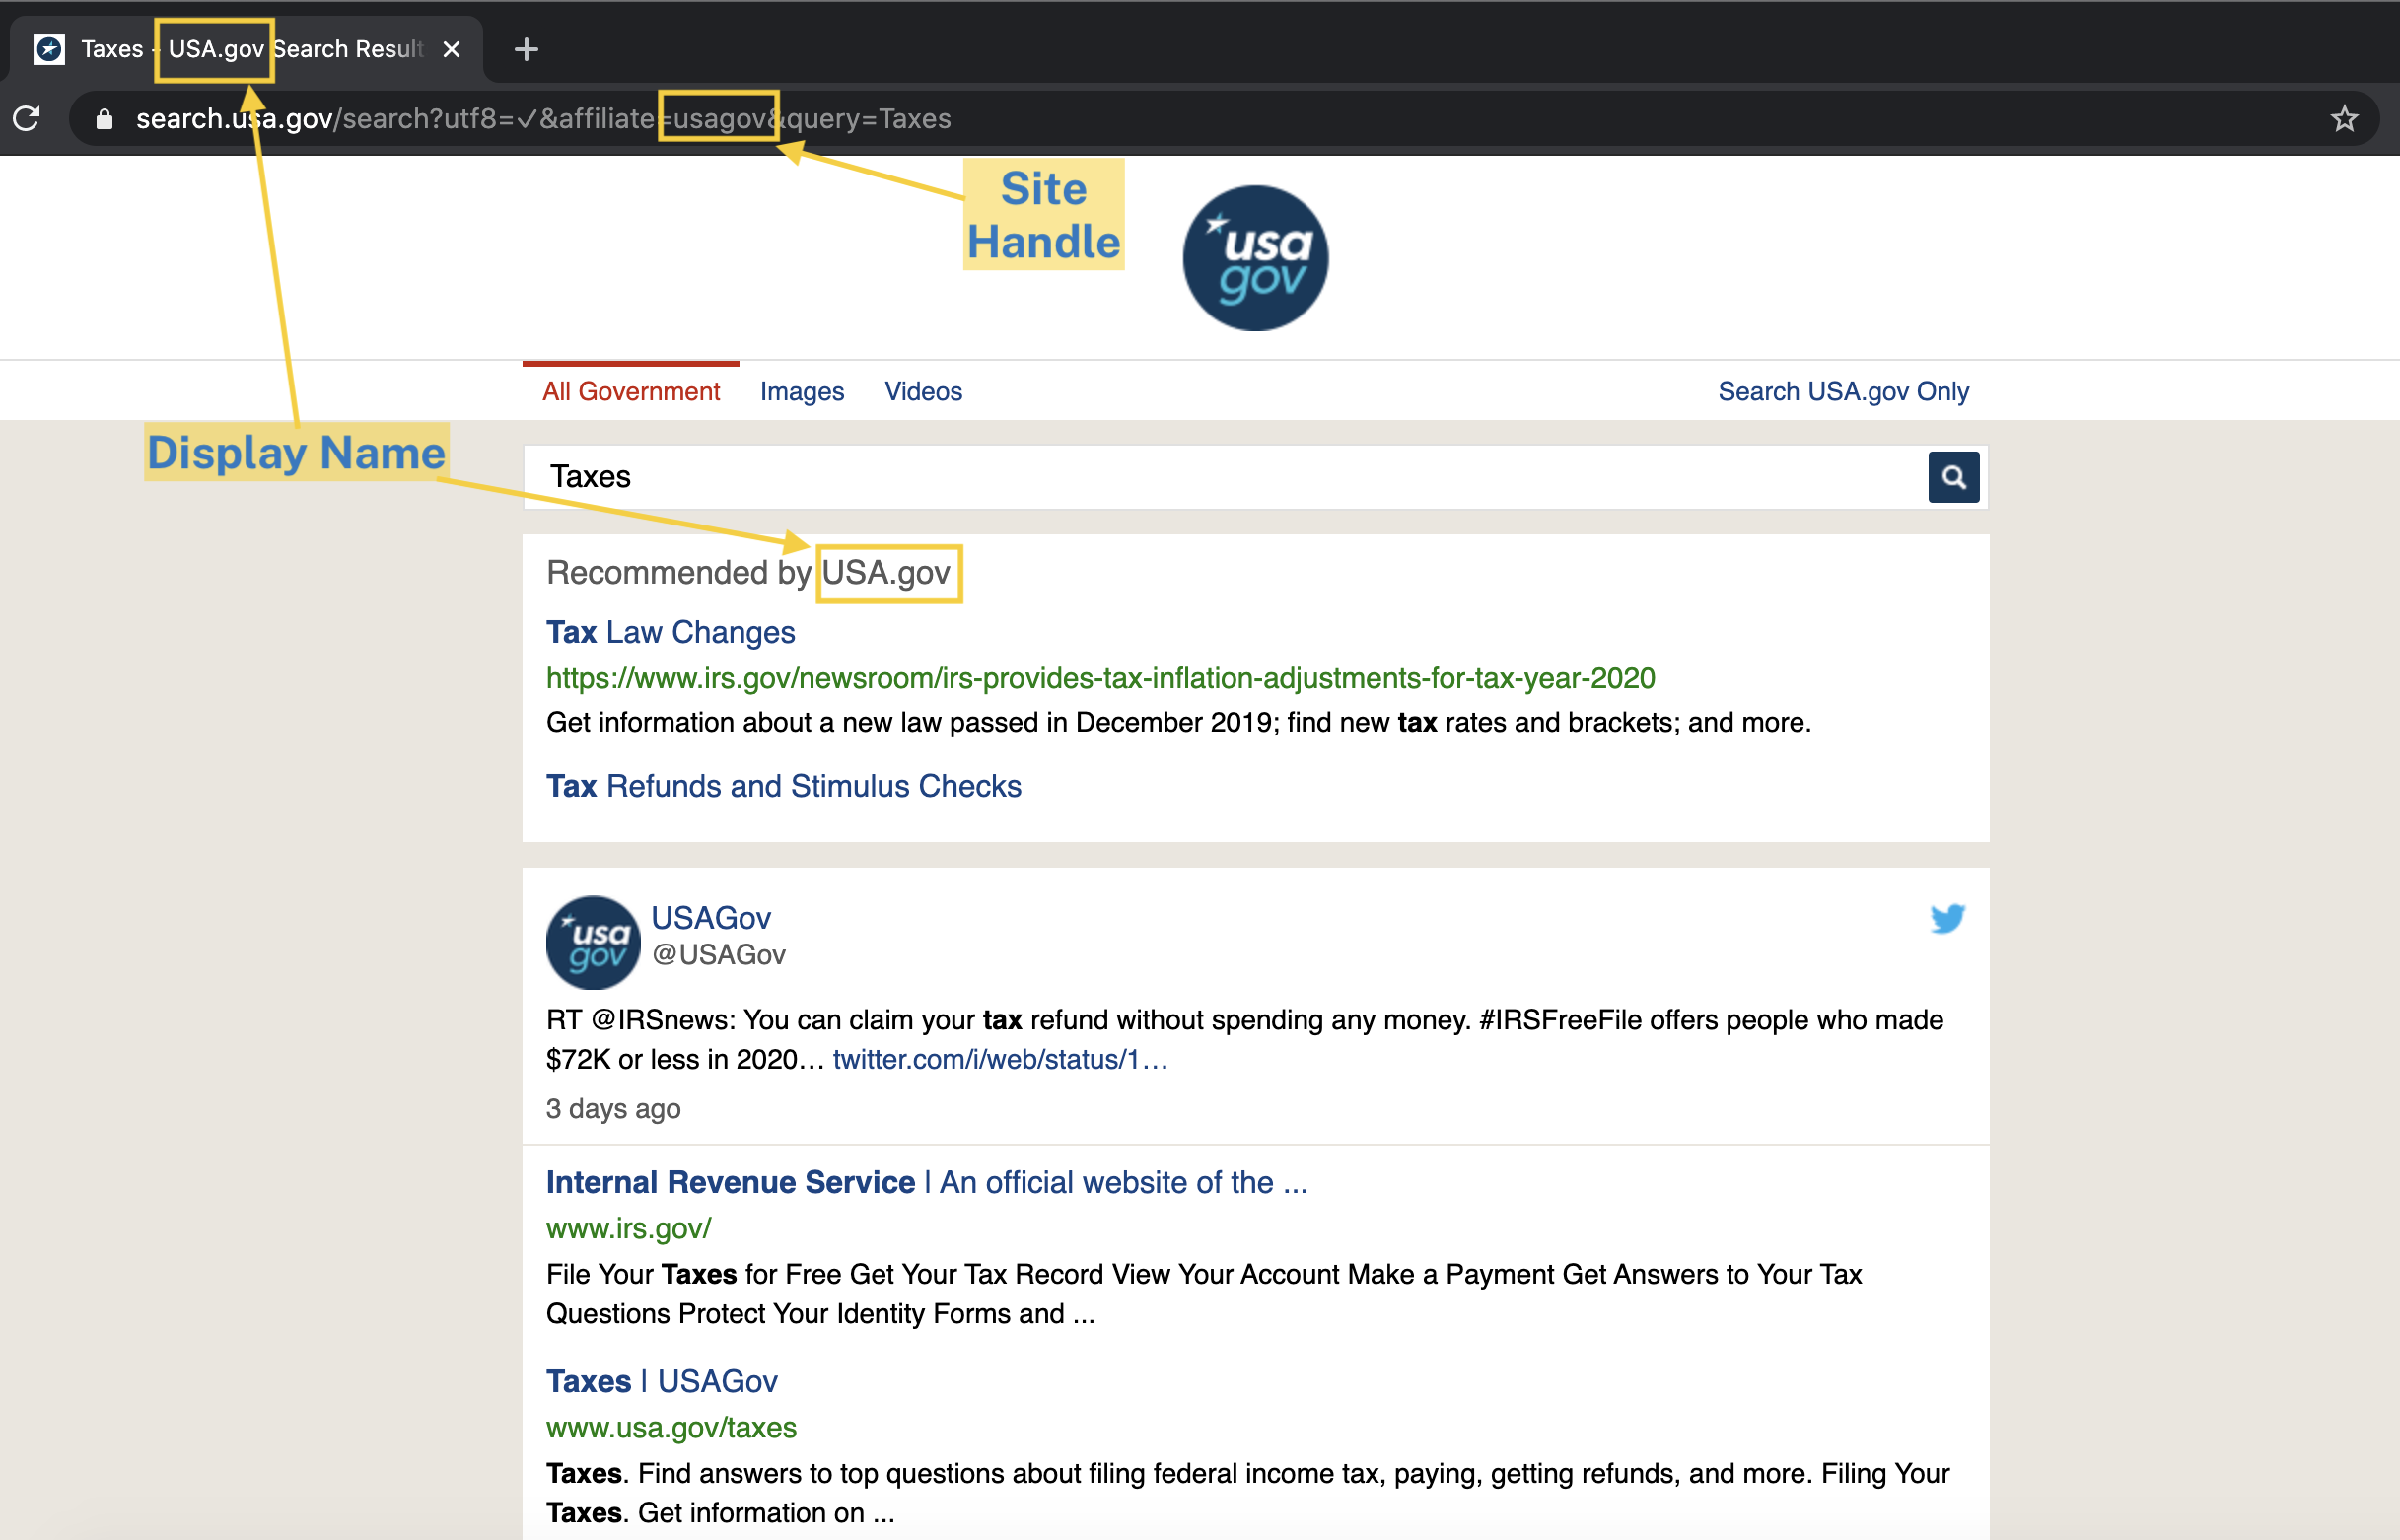 Display Name and Site Handle on NIH.gov's search results page